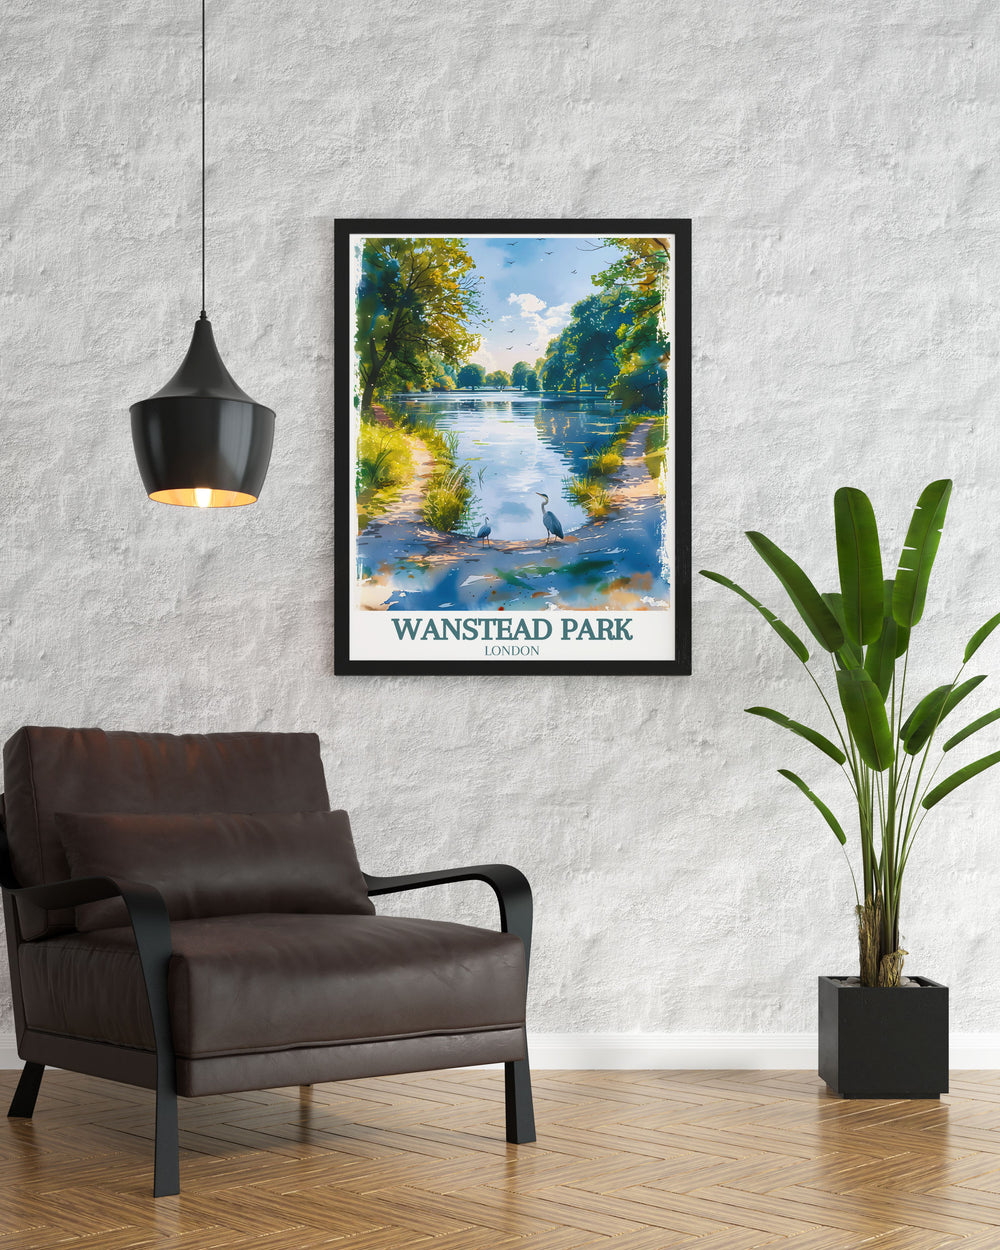 Stunning Wanstead Park poster featuring detailed illustrations of the park's natural scenery. Ideal for those who appreciate London travel prints and want to bring the charm of East Londons parks into their living space.